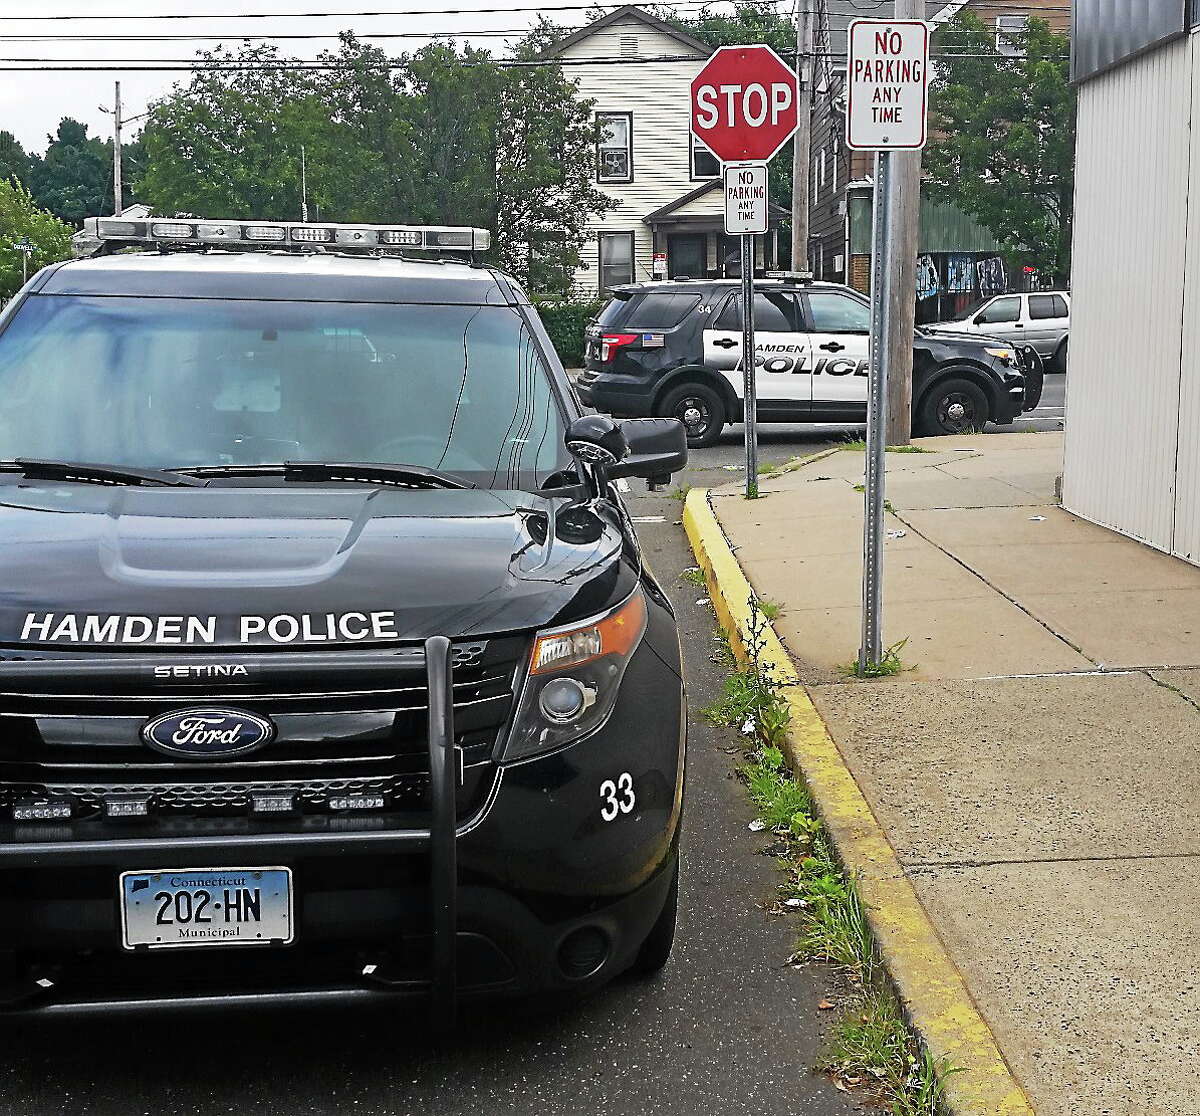 Police parked near the Abdul-Majid Karim Hasan Islamic Center on Sunday. The mosque’s security staff were reportedly preventing some members from entering without answering questions, but police reportedly did not try to stop anyone from praying. (Photo by Shahid Abdul-Karim -- New Haven Register)